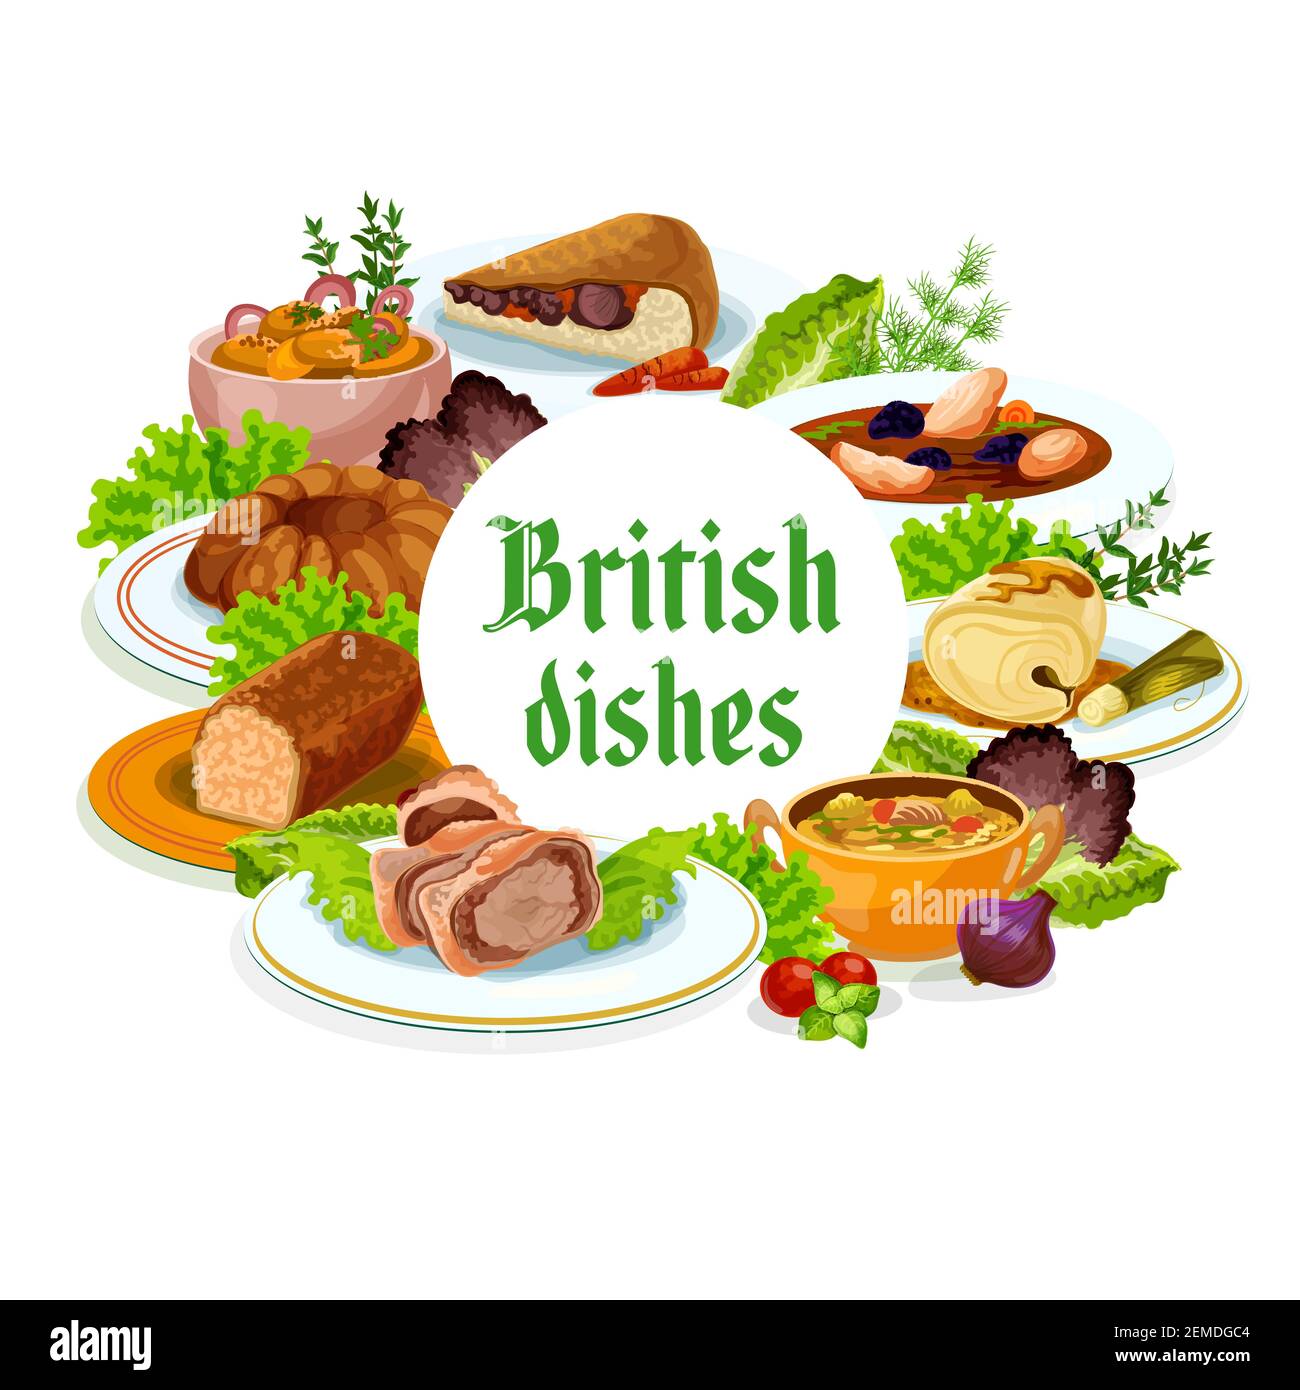 Britain cuisine vector British meals kok-e-liki scotch soup, cod with sauce and english beef wellington, christmas pudding, veal, parkin and picadili Stock Vector